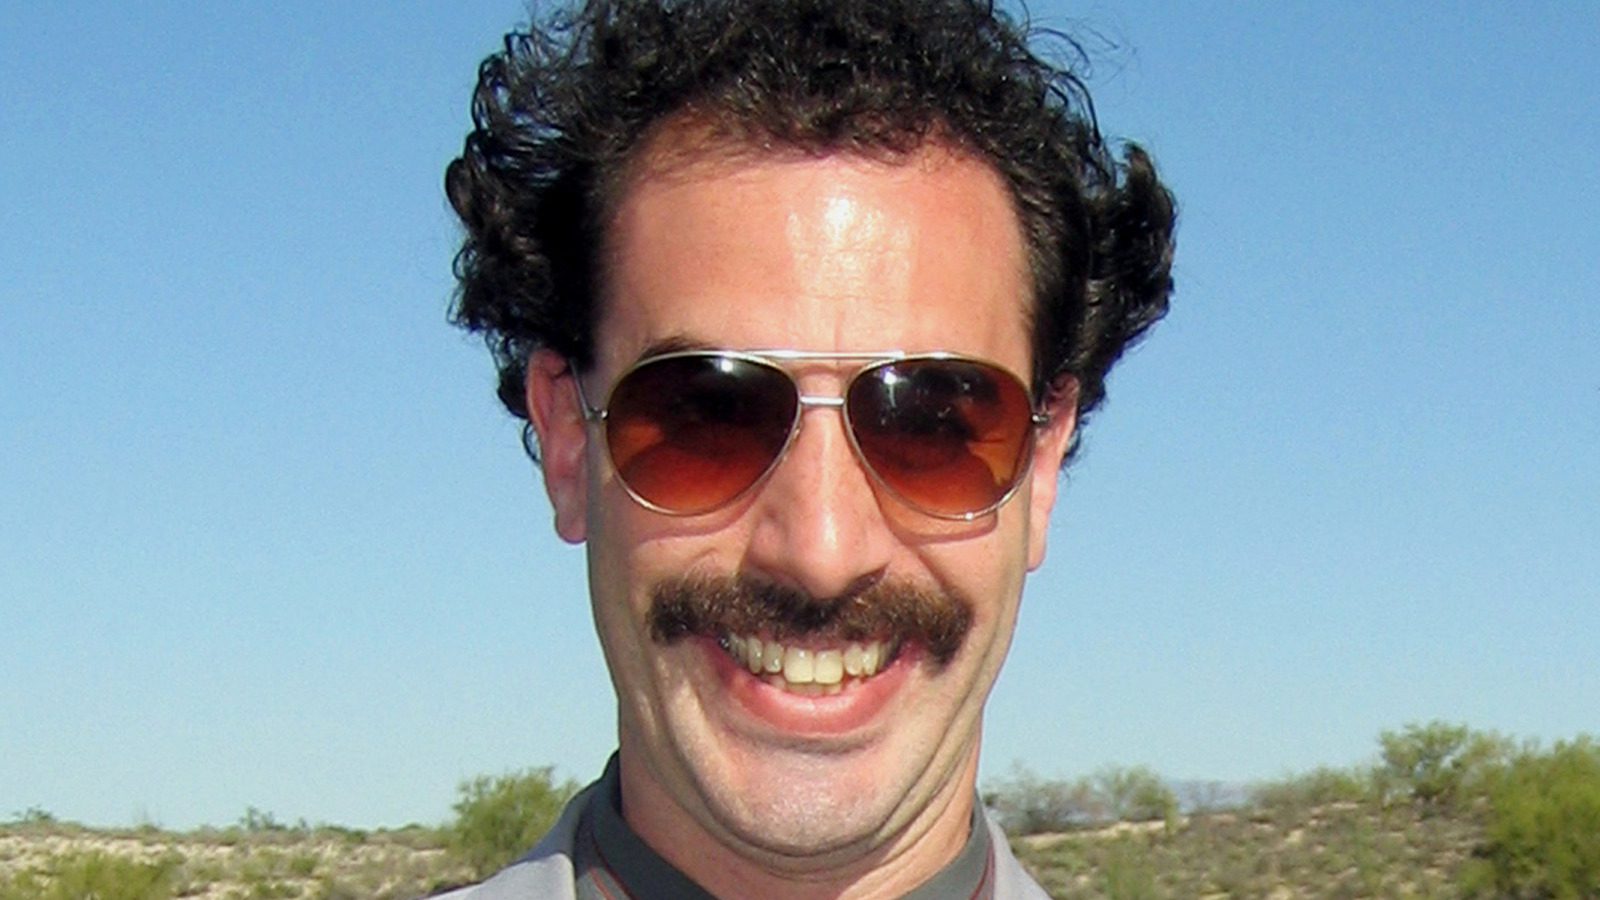 Borat's Journey To The Big Screen Is As Wild As You'd Expect